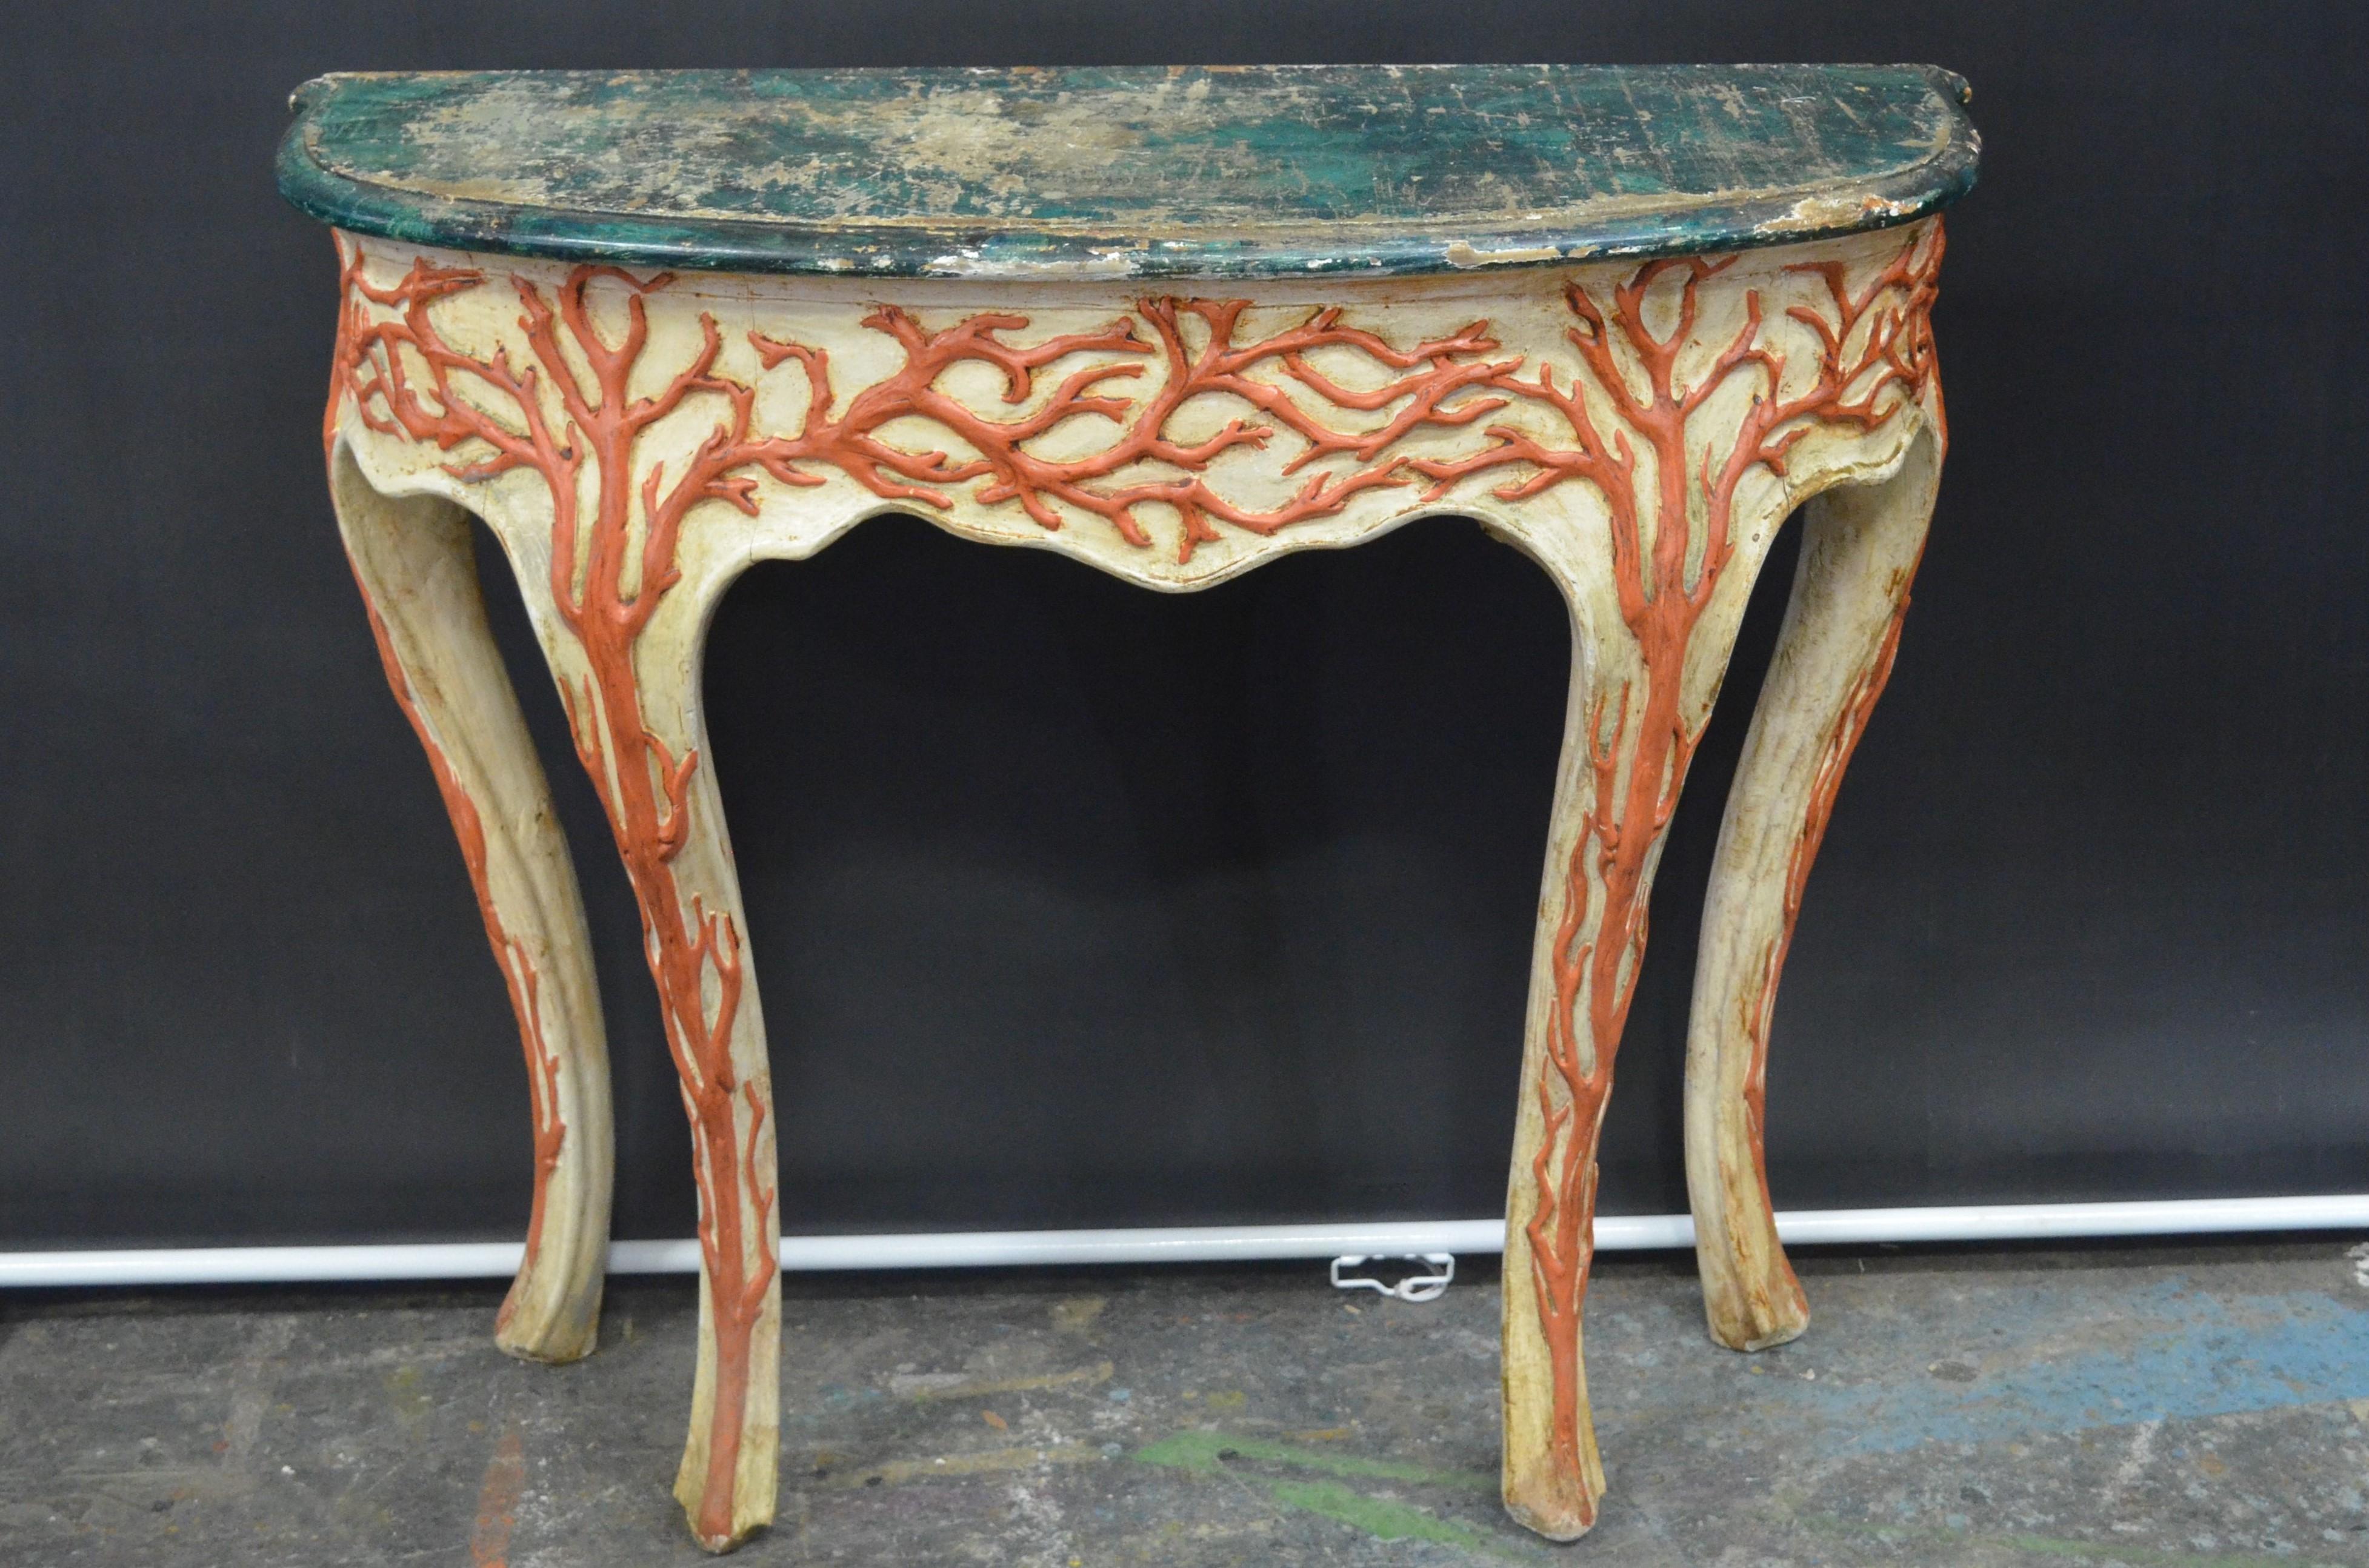 This Rare Italian Cabriole Leg Console With Carved Faux Coral Motifs & Faux Marble Top Stamped Palladio on back.